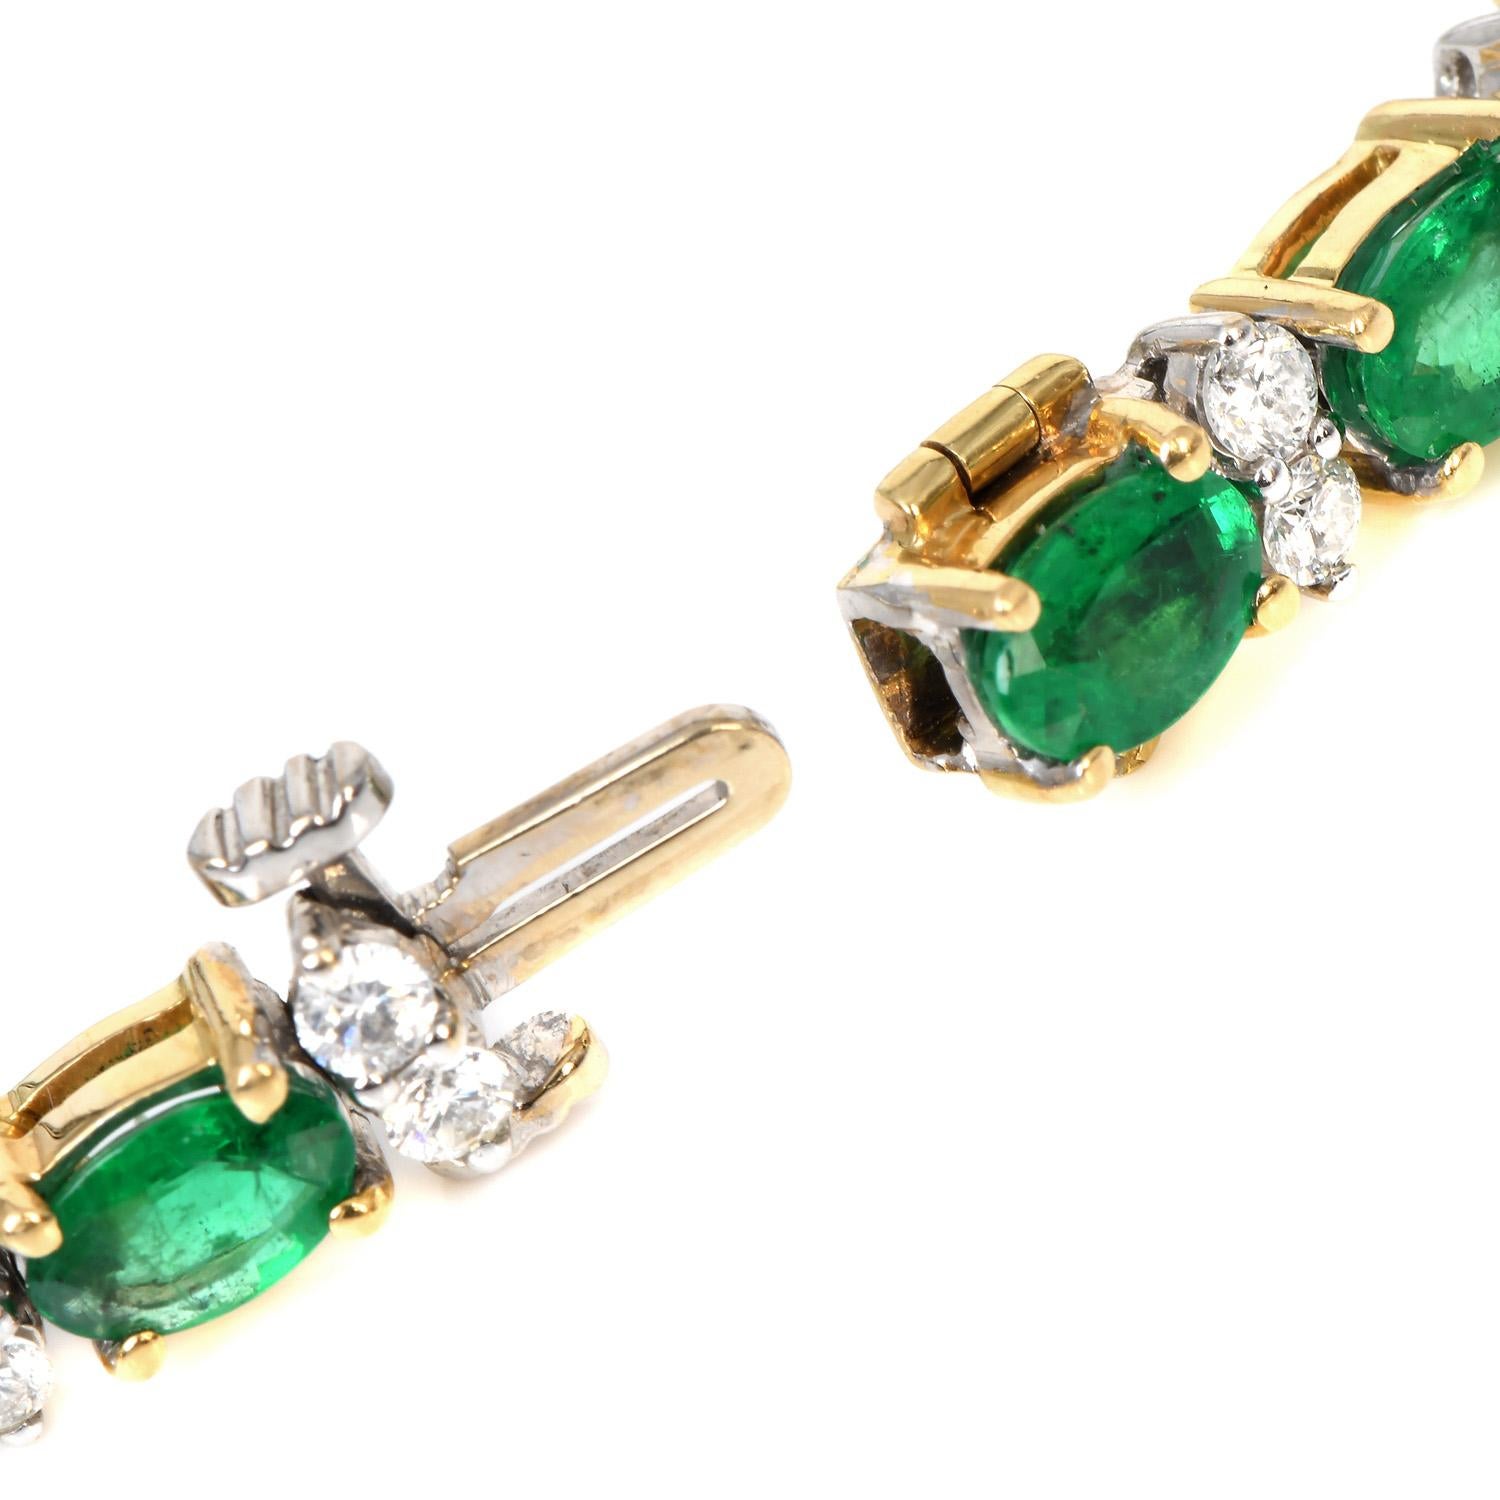 11.00ct Emerald Diamond 18K Yellow Gold Tennis Line Link Bracelet In Excellent Condition For Sale In Miami, FL